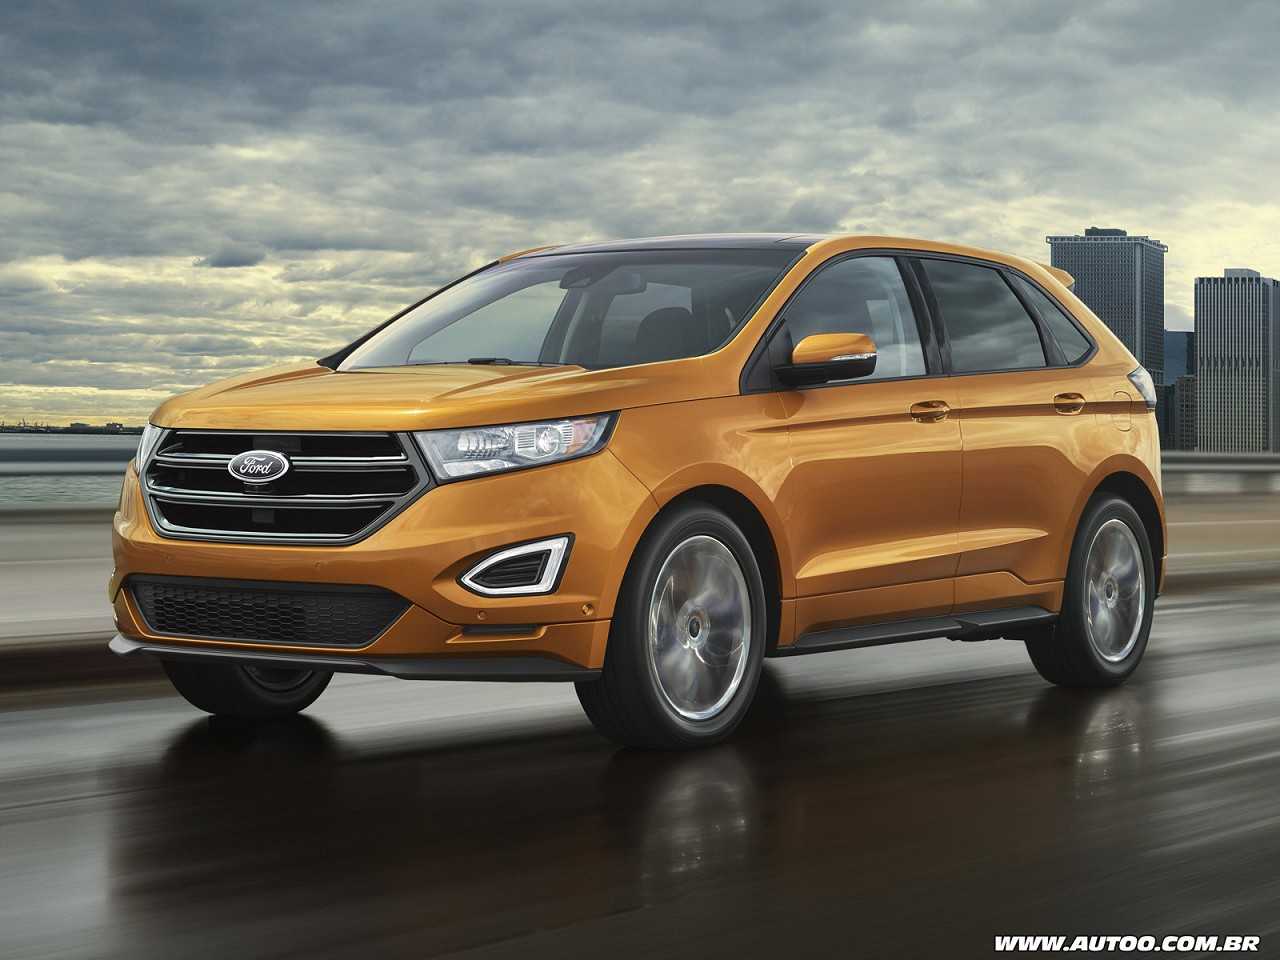 FordEdge 2016 - ngulo frontal